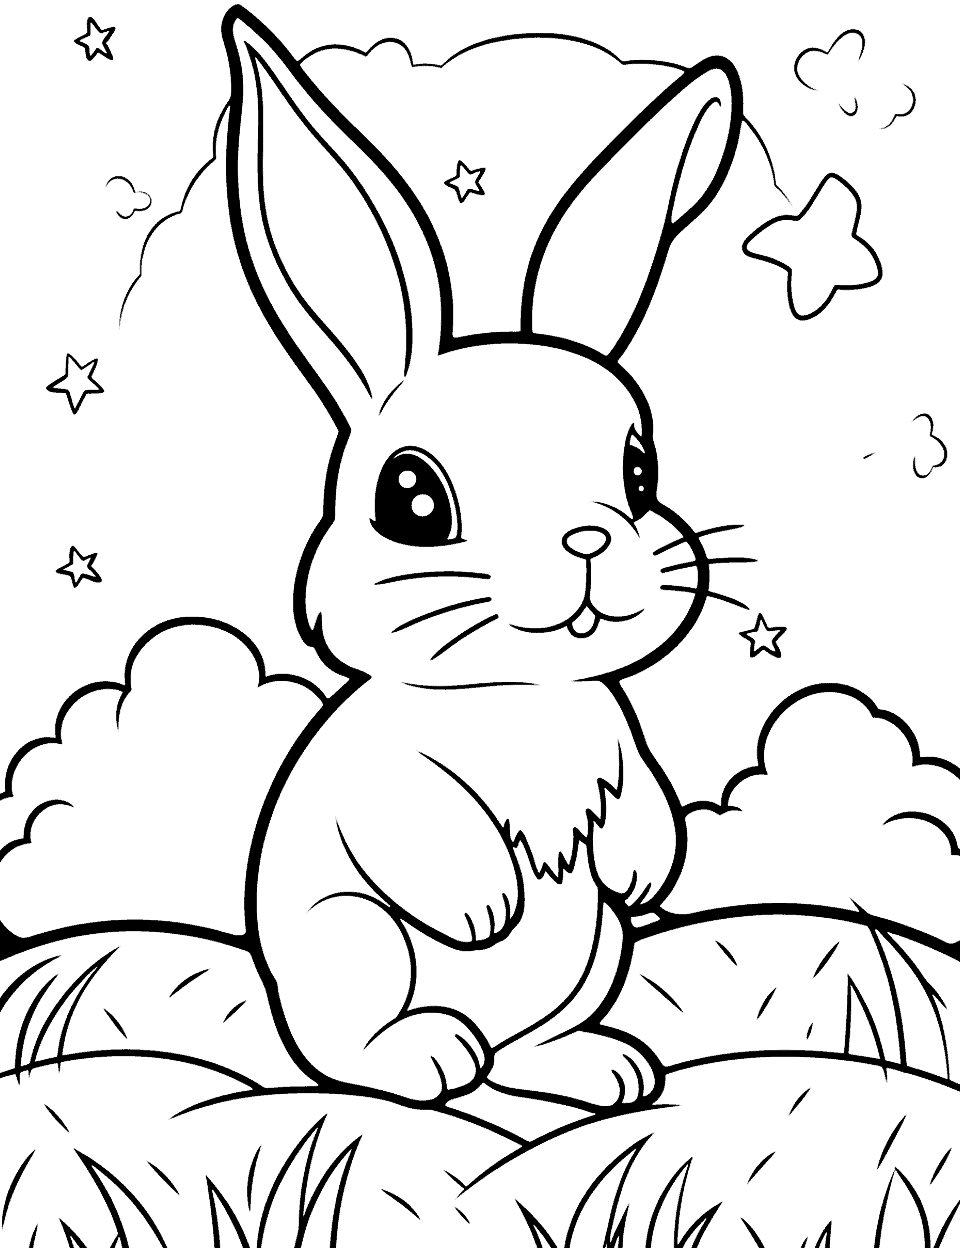 Starry Night and Bunny's Silhouette Bunny Coloring Page - A peaceful scene showcasing the silhouette of a bunny against a star-filled night sky.